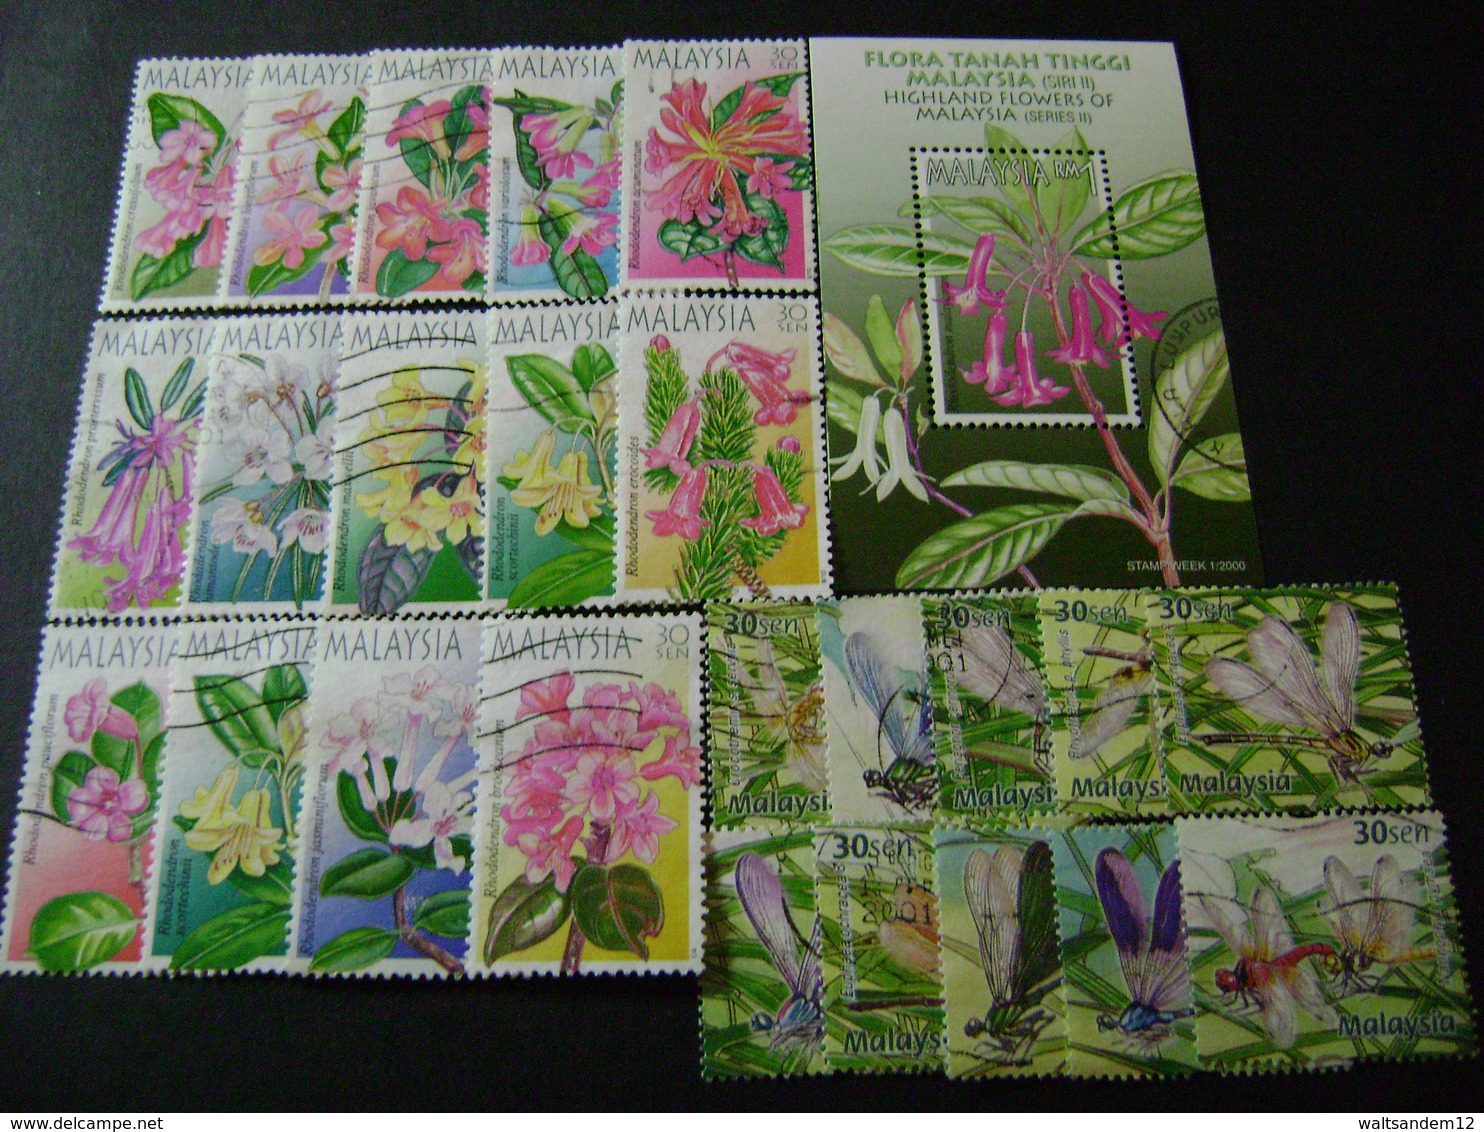 Malaysia 2000 stamp issues (between SG 840 and 969 - see description) 9 images - Used